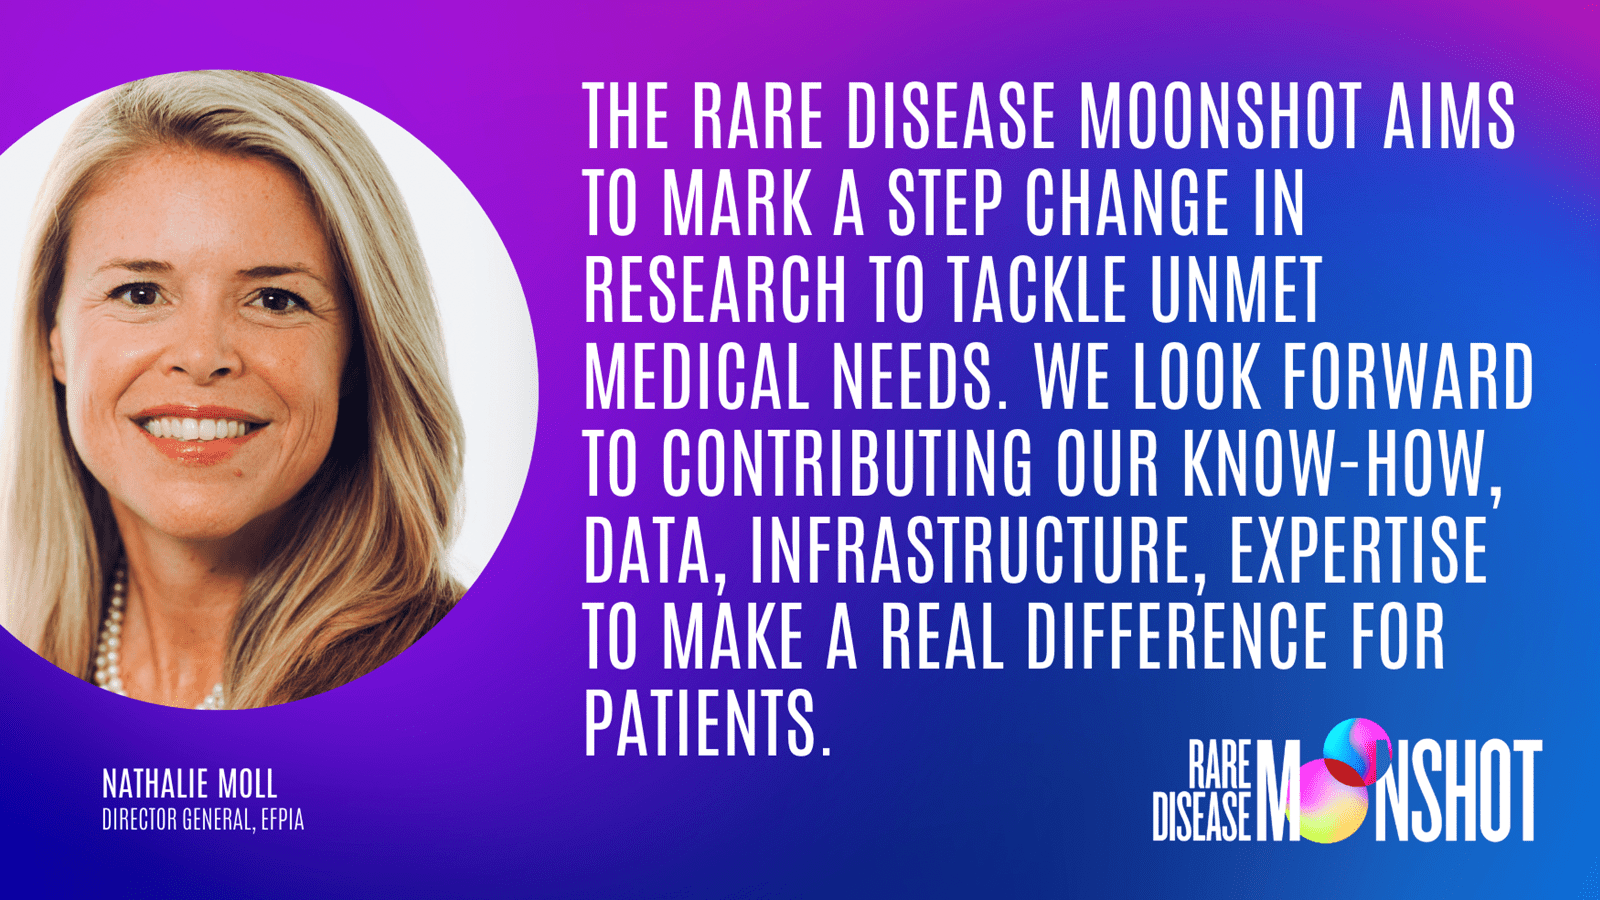 The rare disease moonshot aims to mark a step change in research to tackle unmet medical needs.